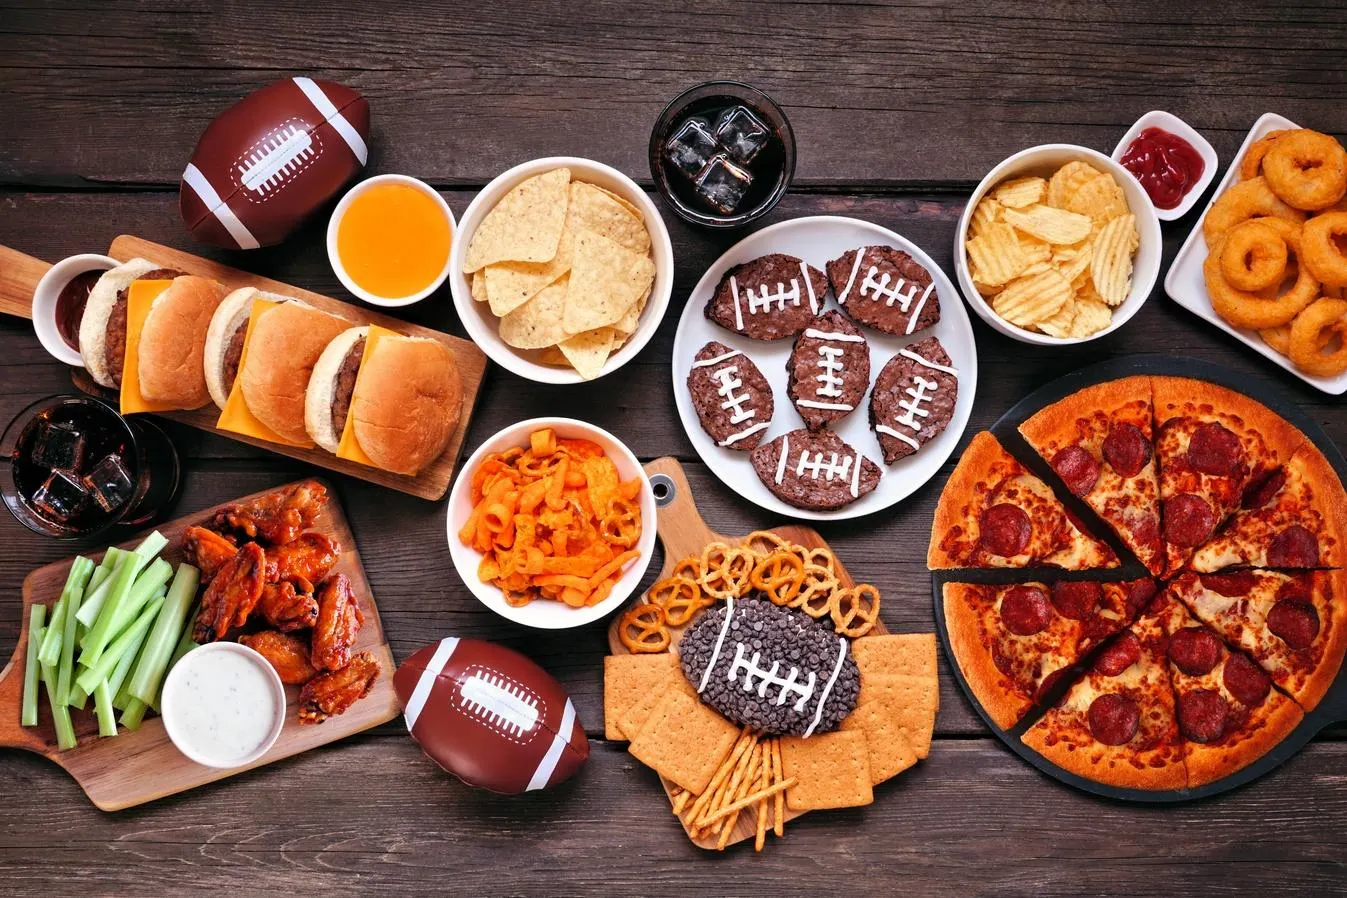 The Best-selling And Most Consumed Foods At The Nfl Super Bowl